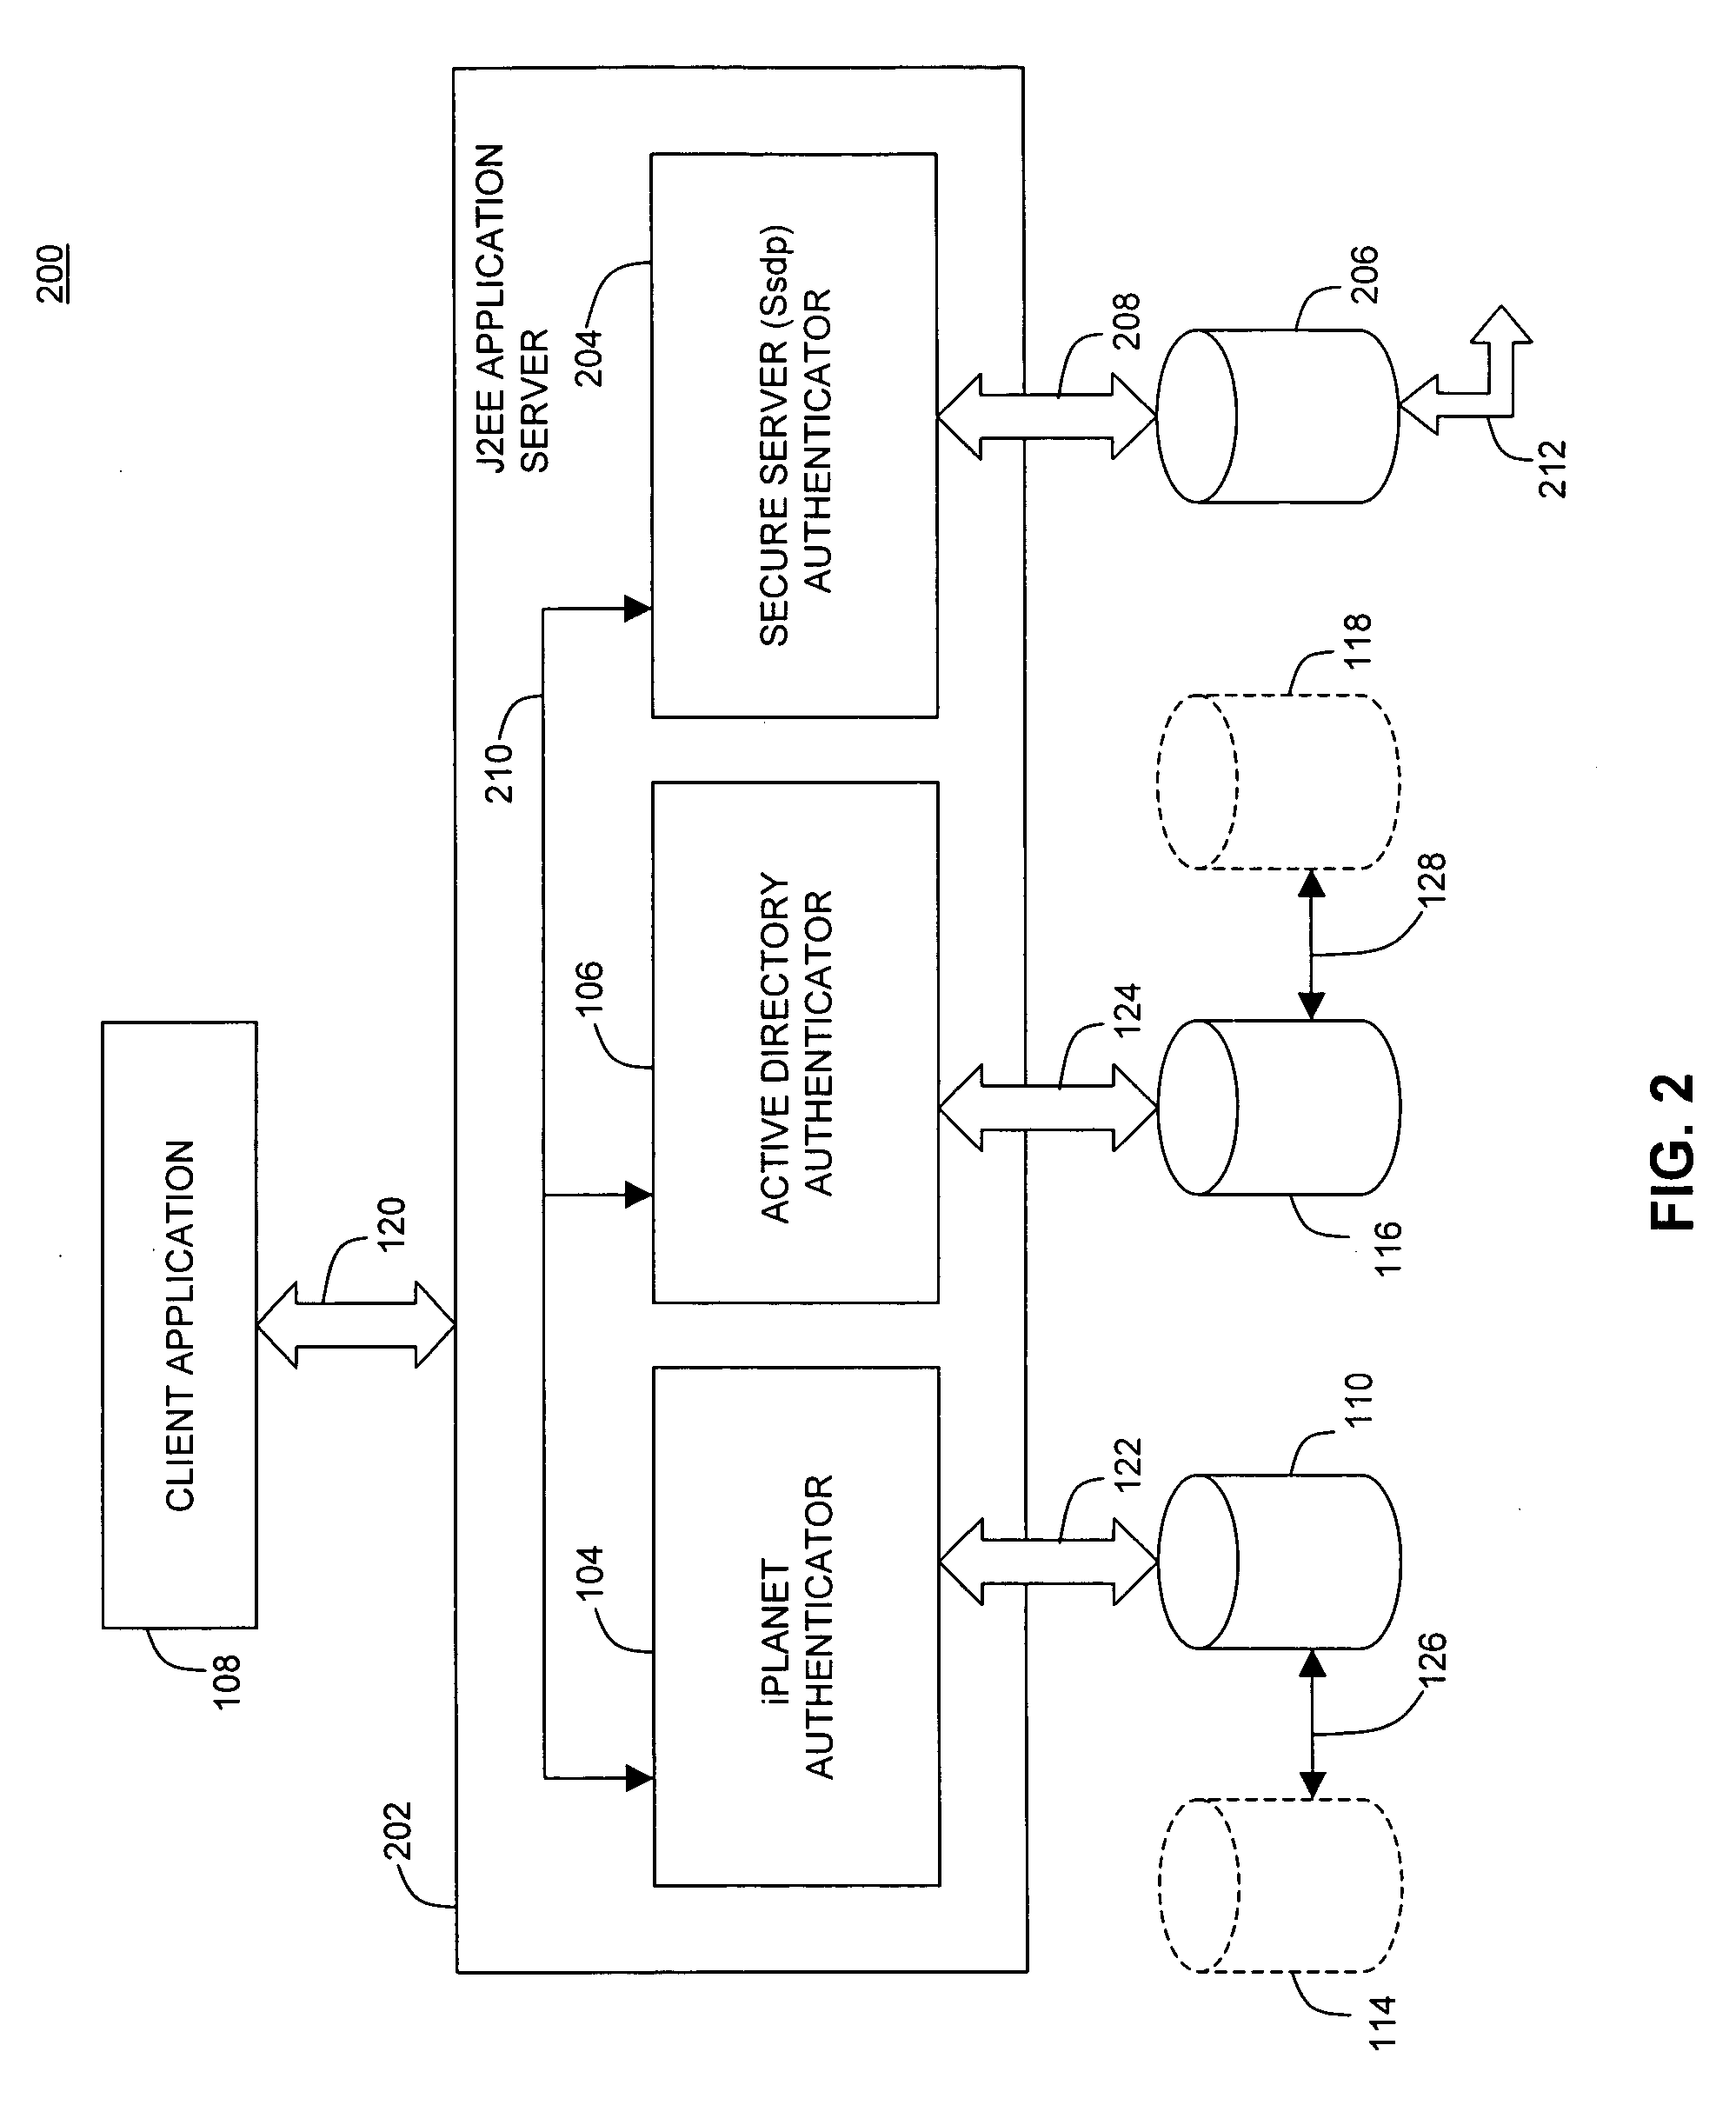 Method and apparatus for user authentication and authorization